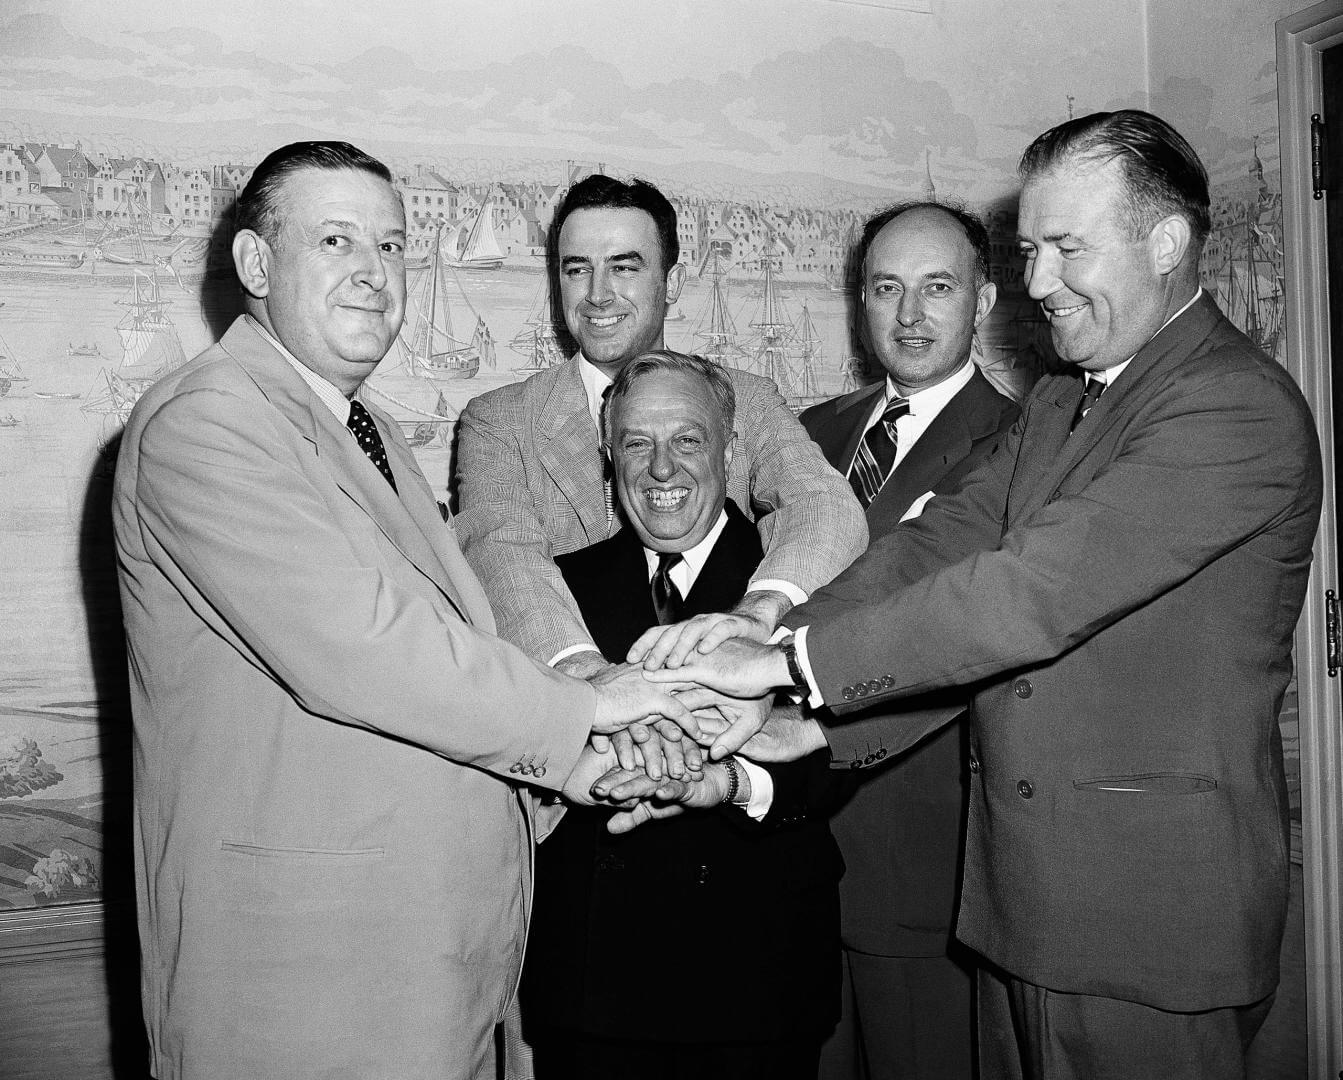 Representatives of the National Basketball League and Basketball Association of America, shake hands after agreeing to a merger of the two circuits into an 18-team organization to be known as the National Basketball Association, Aug 3, 1949, New York. Grouped around the smiling Maurice Podoloff, center, are left to right: Ike Duffey, Leo Ferris, Ned Irish, and Walter Brown. (AP Photo/John Lent)